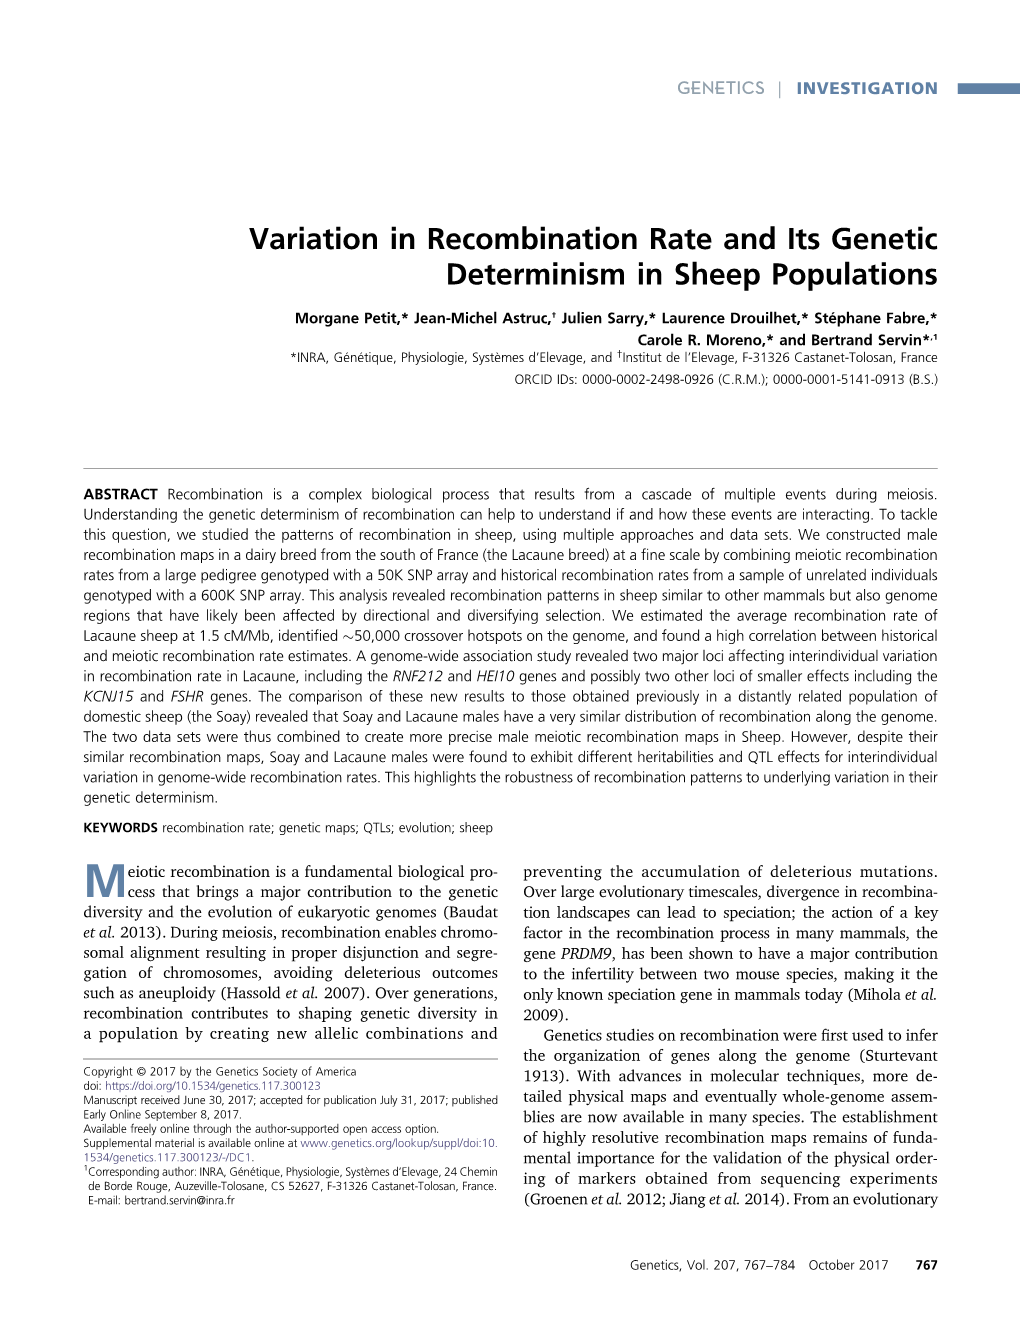 Variation in Recombination Rate and Its Genetic Determinism in Sheep Populations